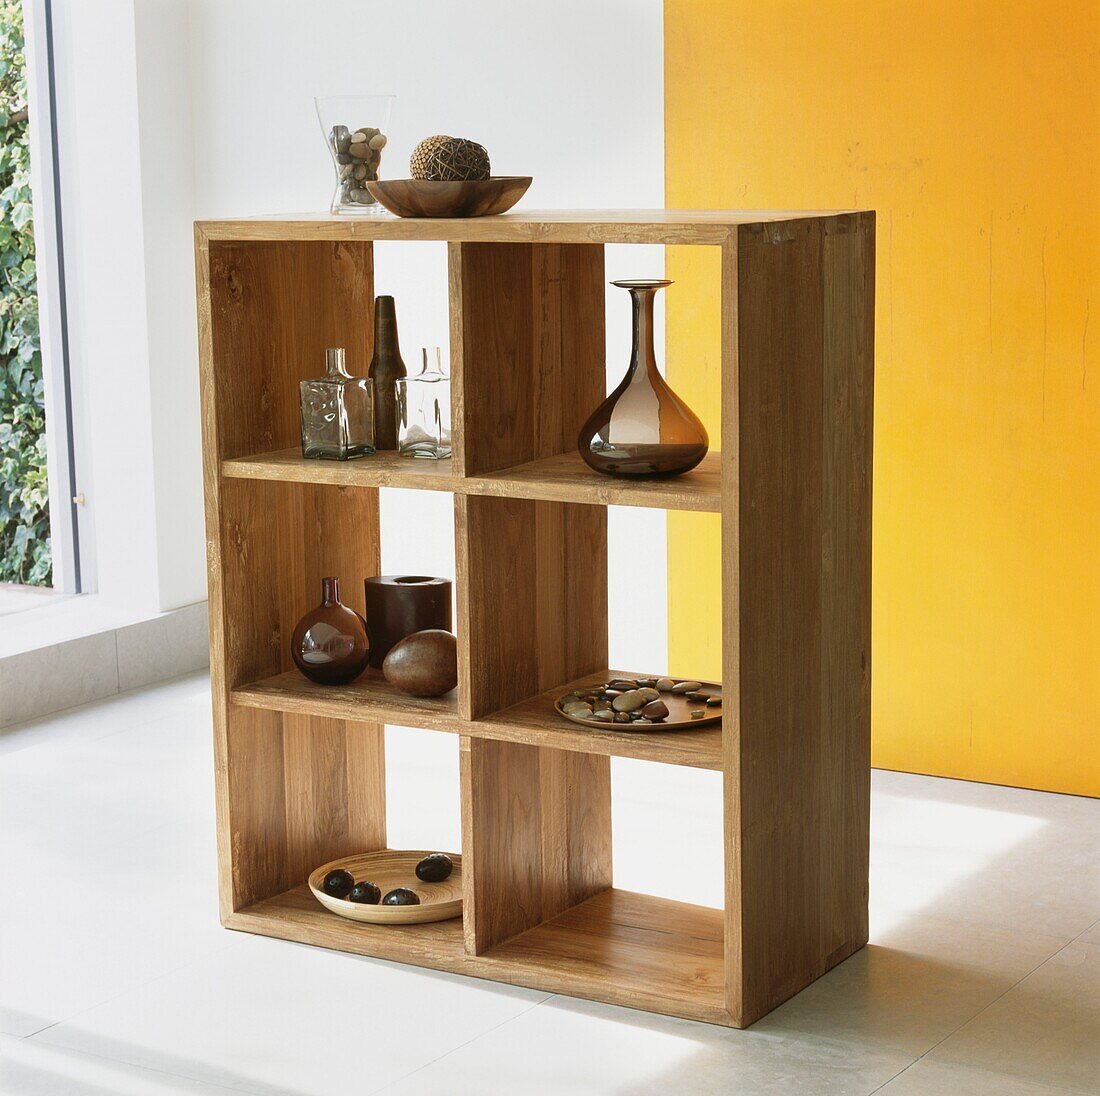 Freestanding wooden shelving unit with ornaments